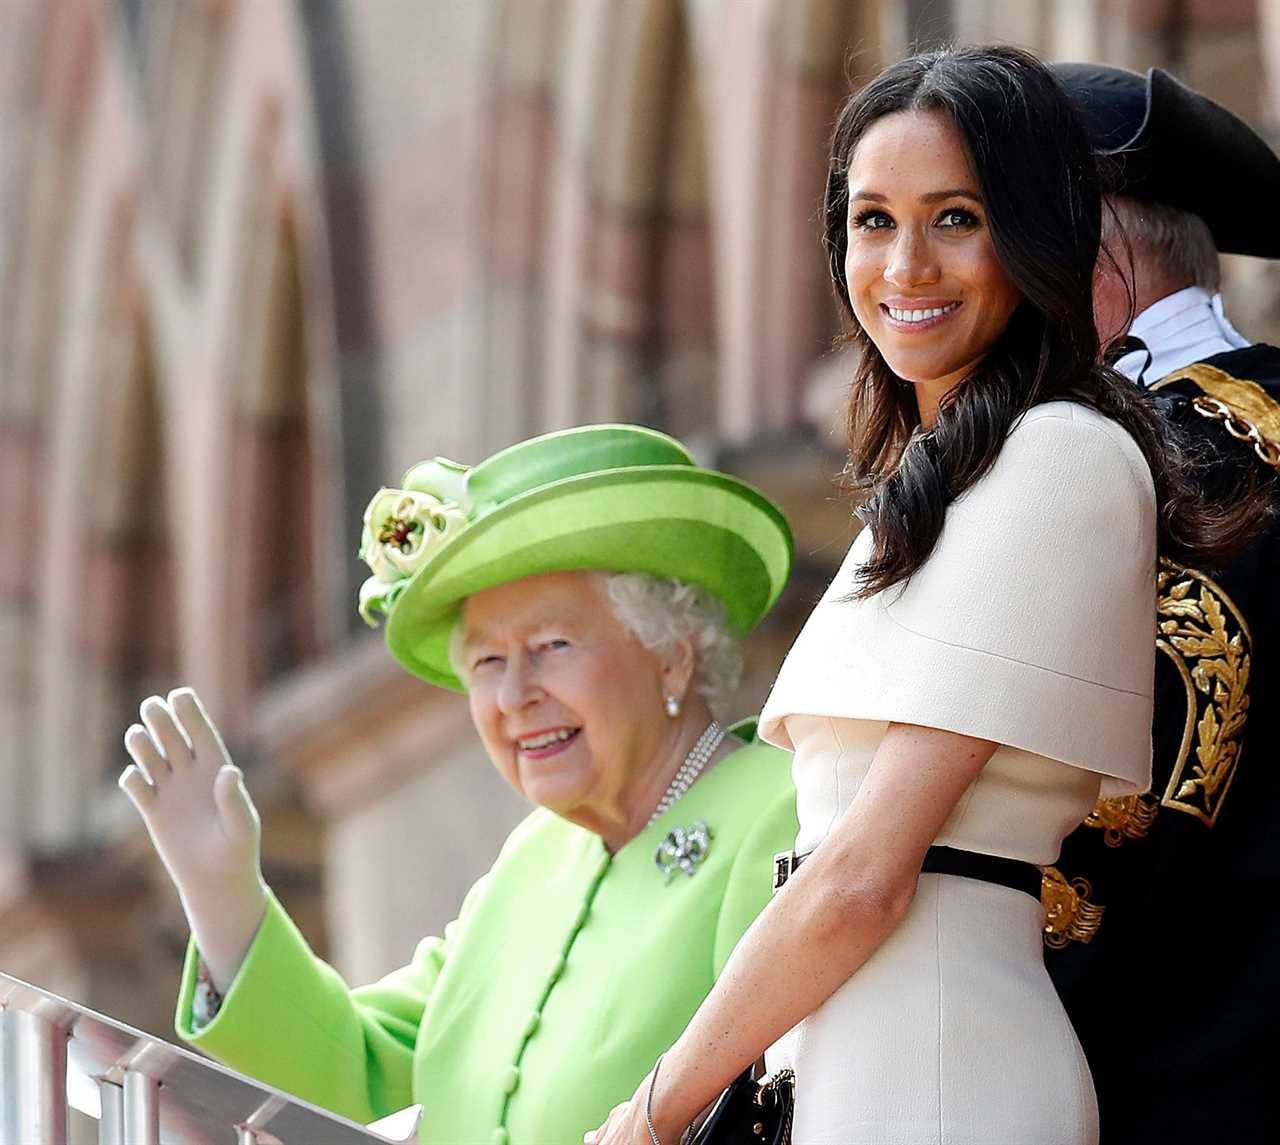 One of the pictures shows the Queen and Meghan in Chester in 2018